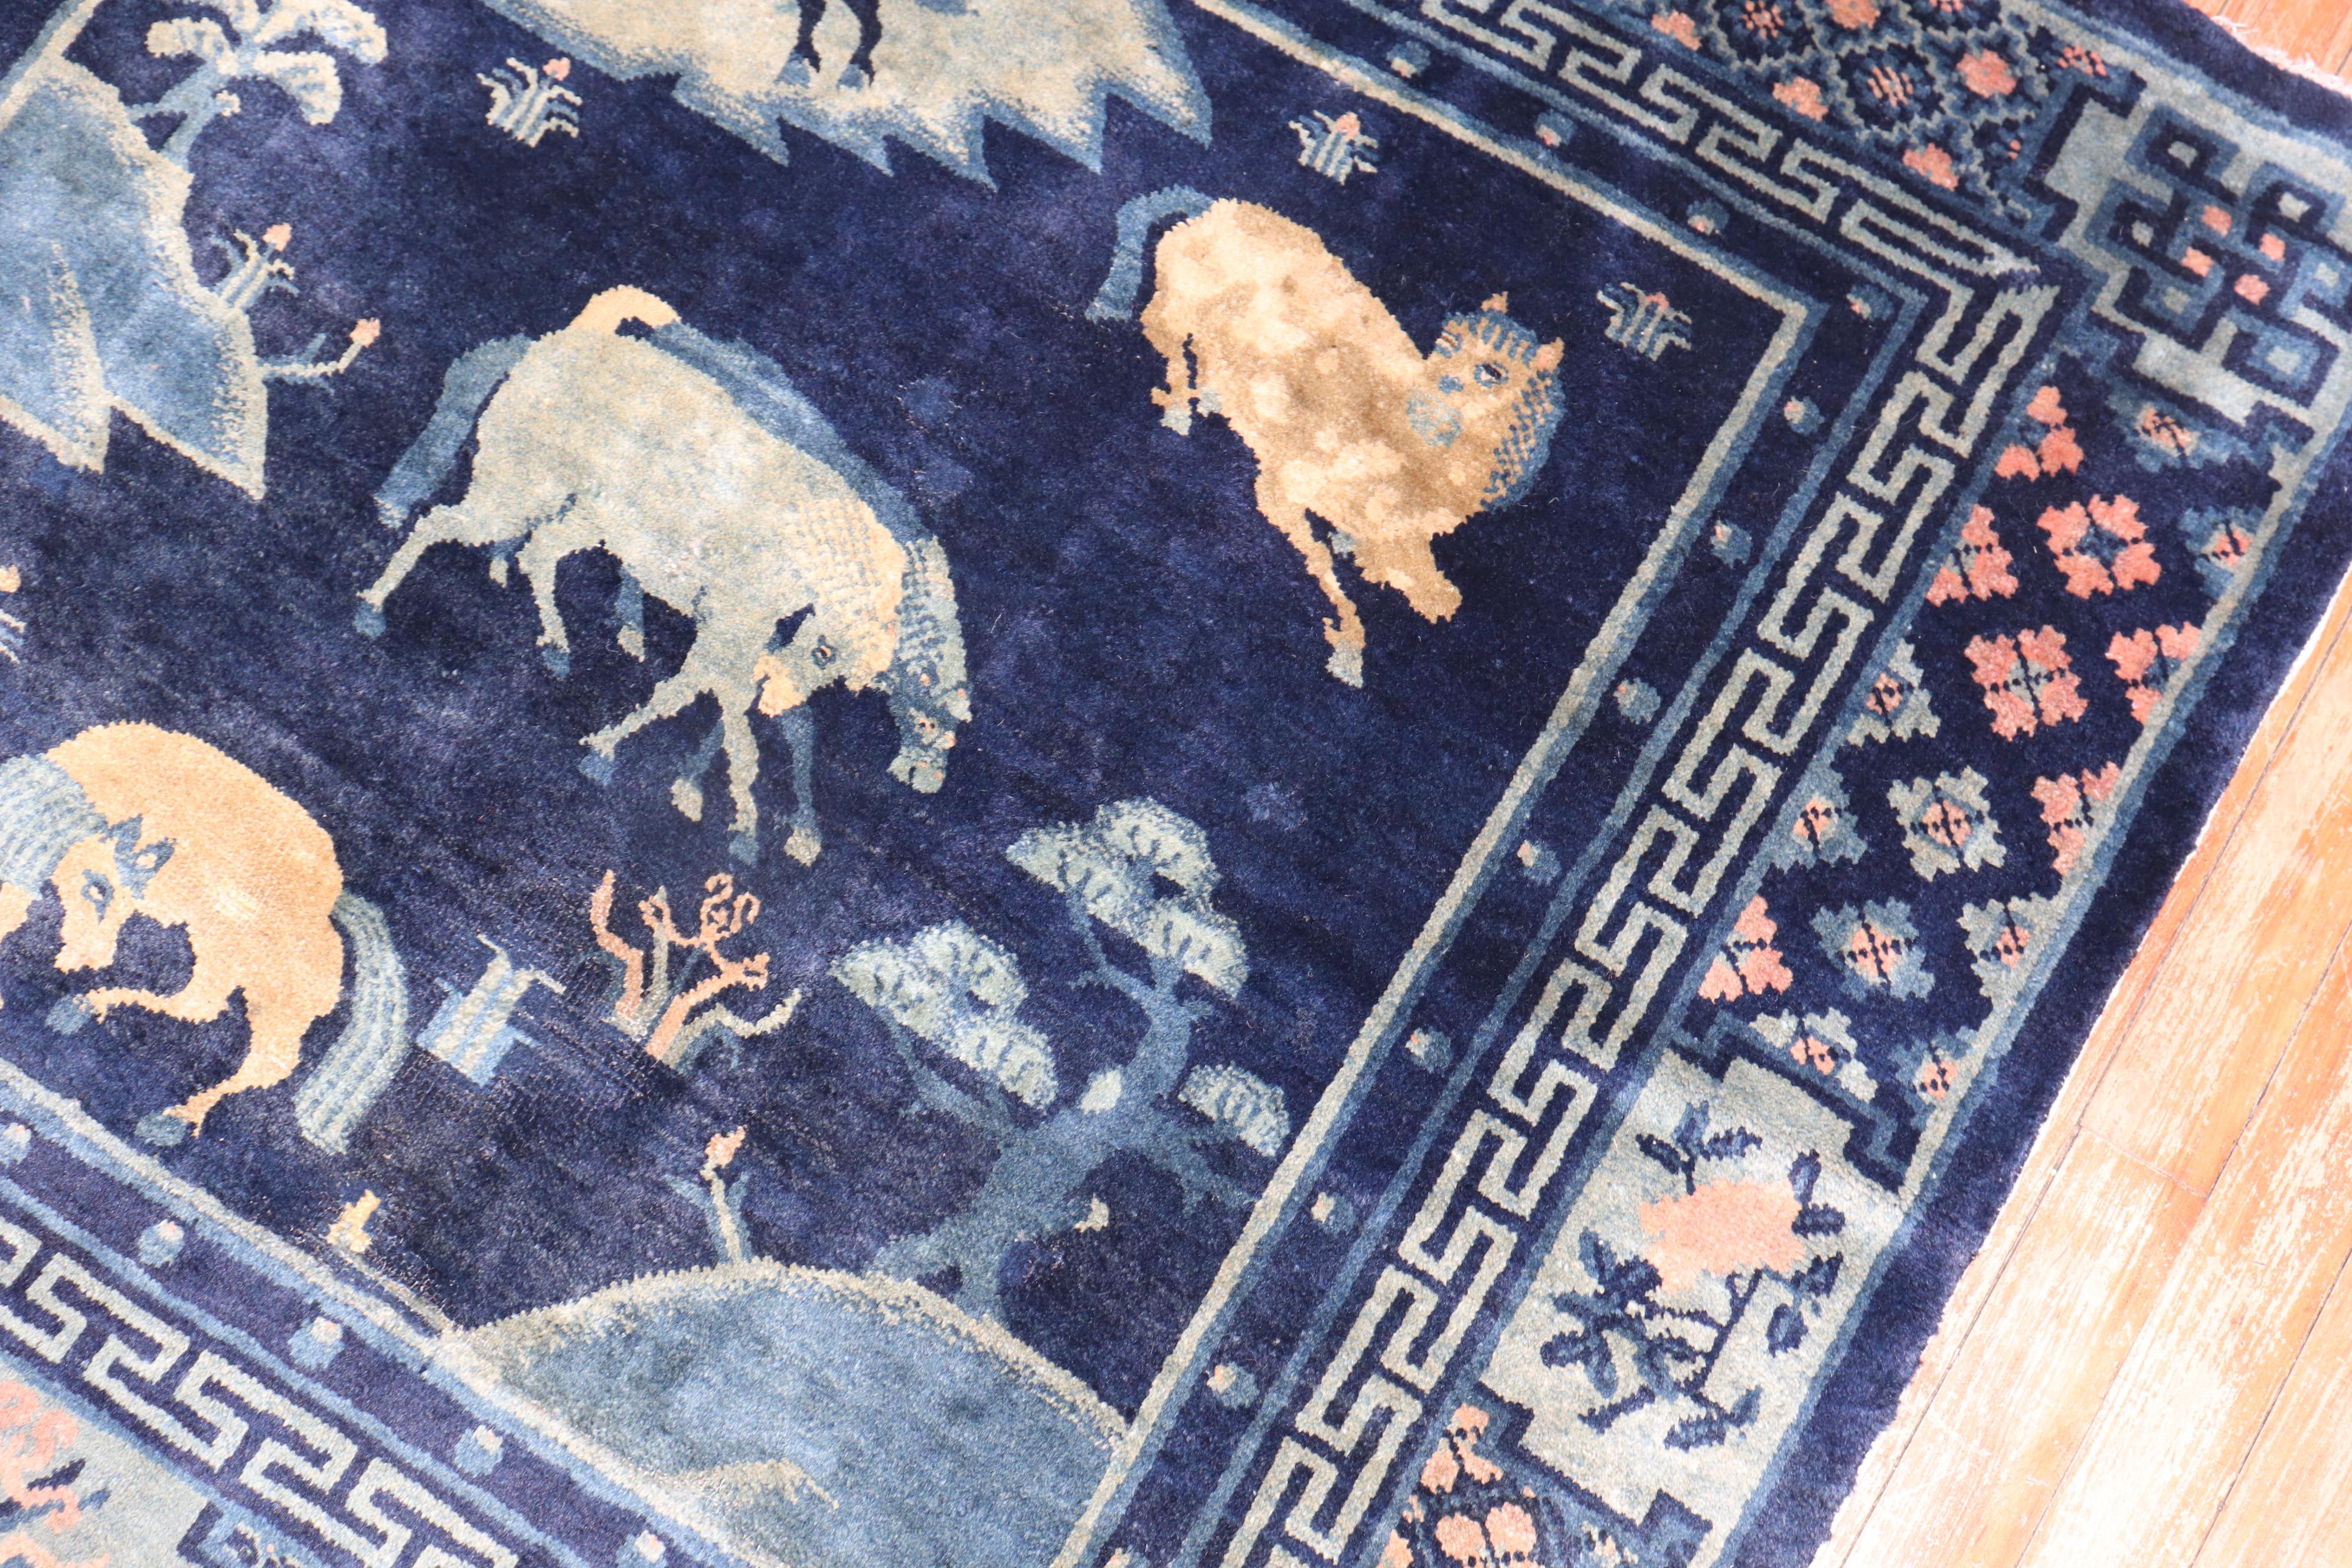 Hand-Woven Horse Herd Pictorial Square Chinese Rug